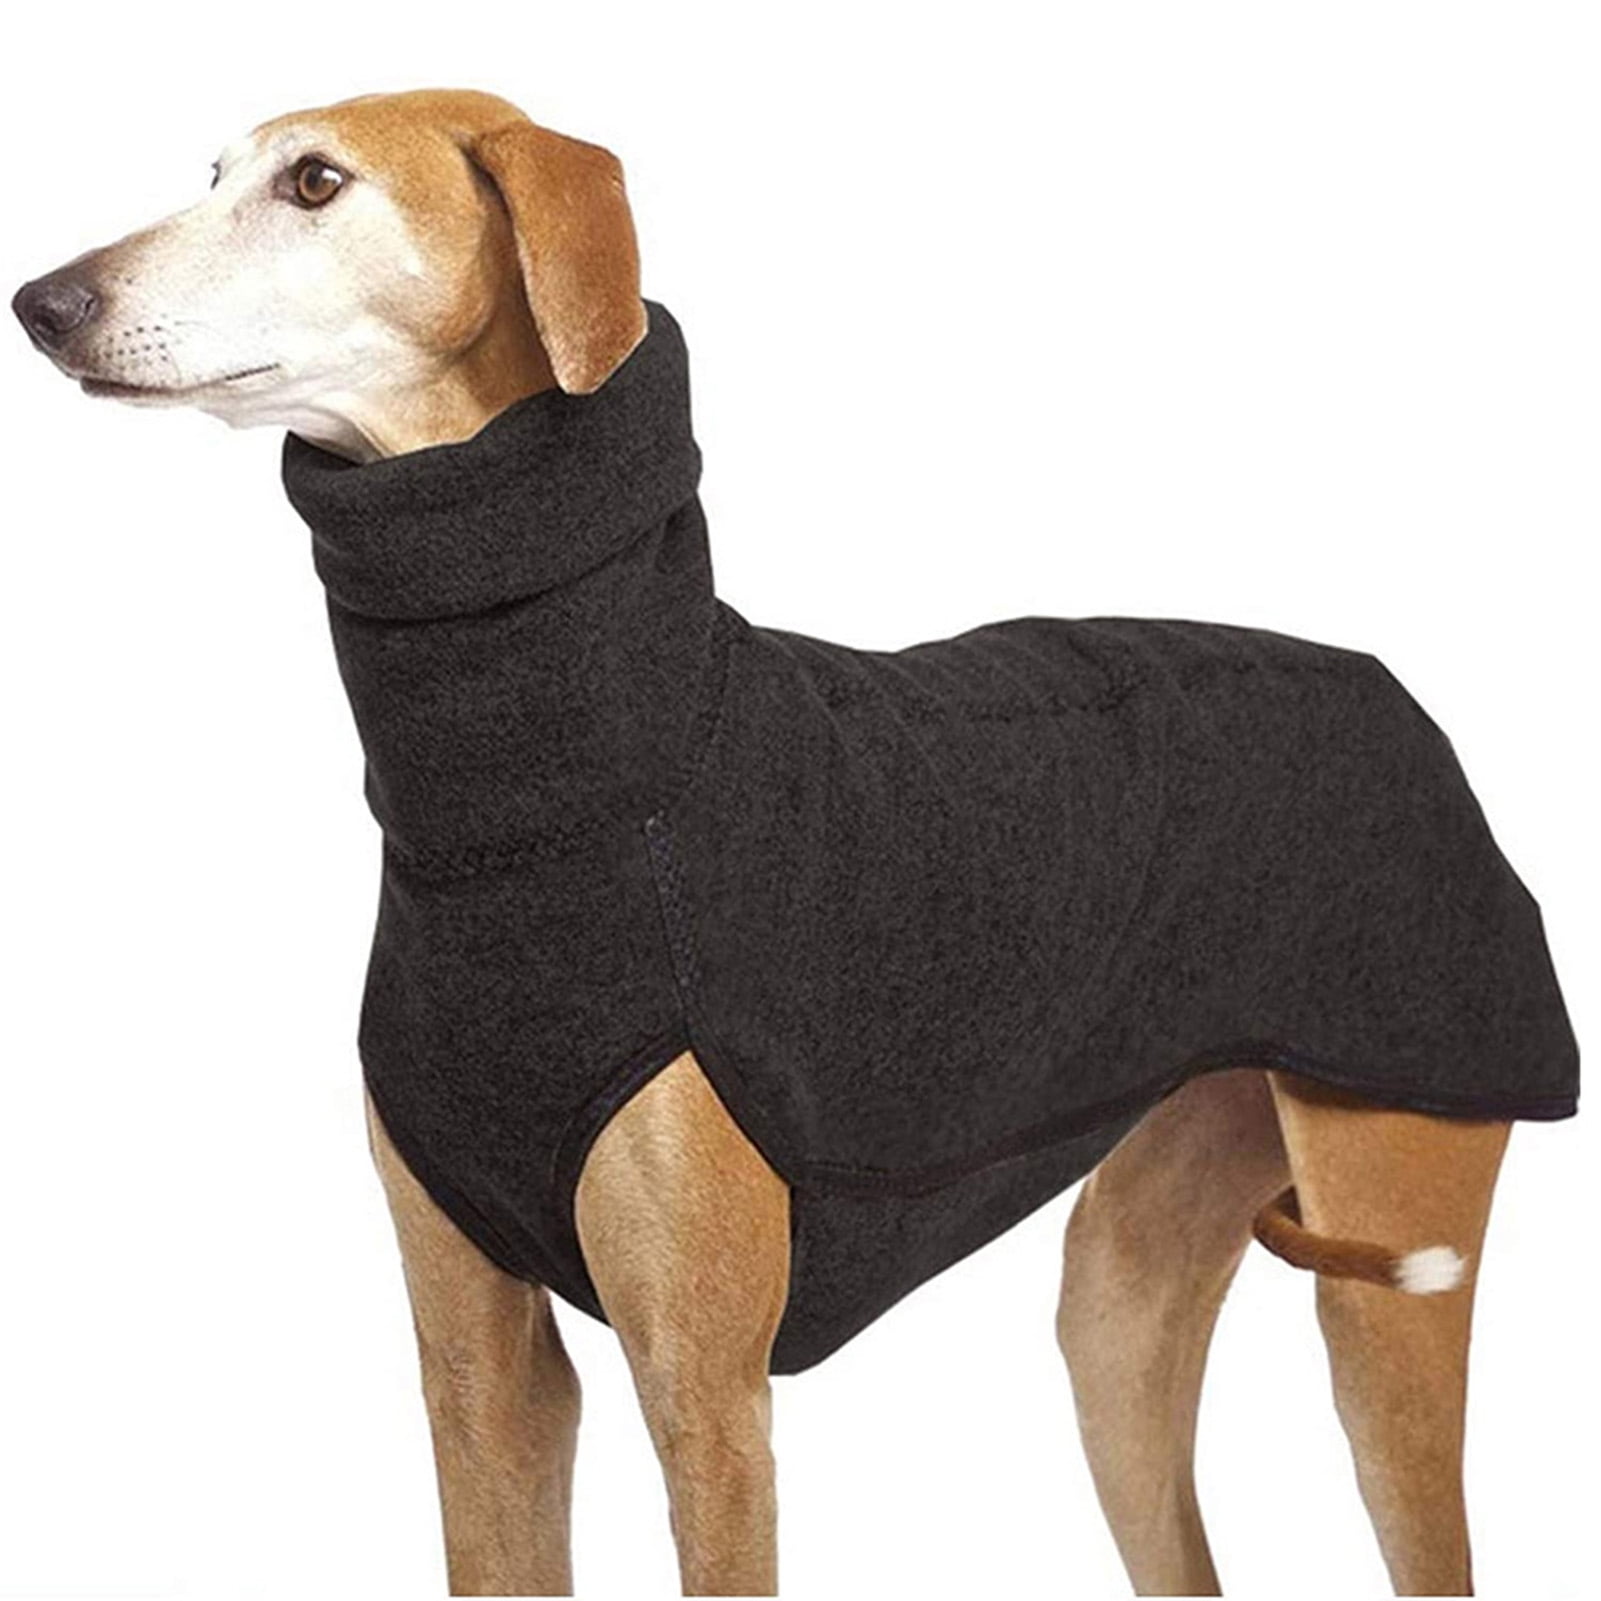 Custom made to fit your dog Polar Fleece Dog Suit Please see Pics and Description for sizing info.